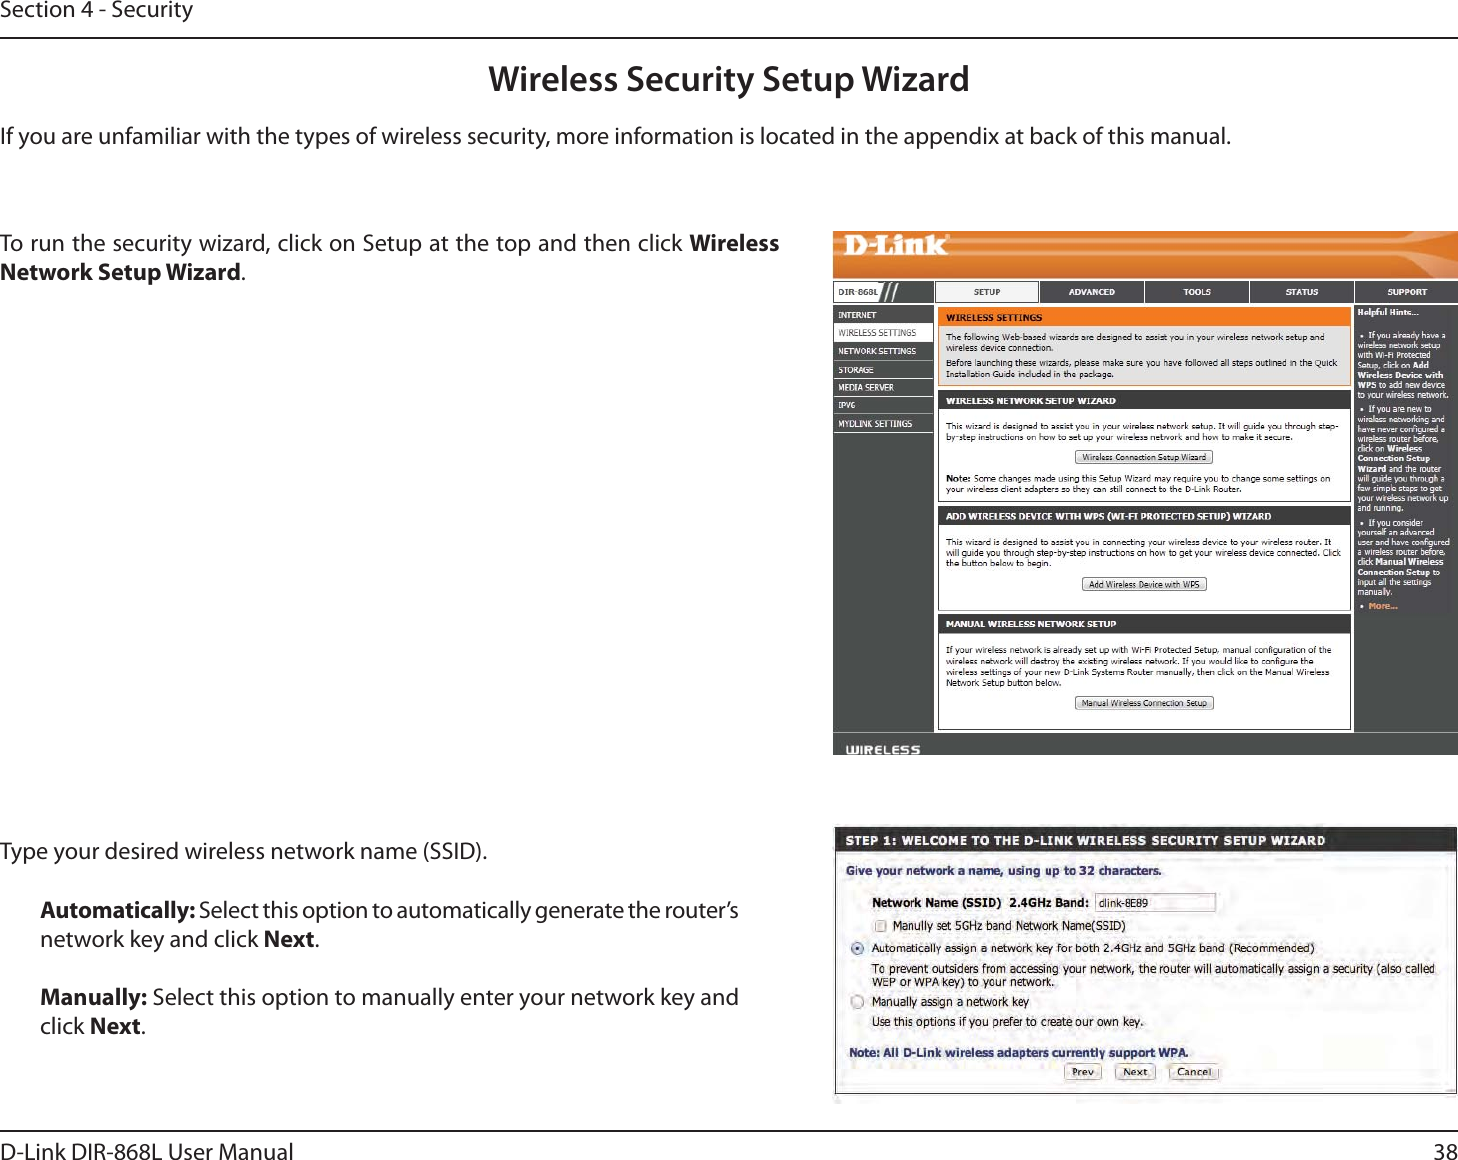 38D-Link DIR-868L User ManualSection 4 - SecurityWireless Security Setup WizardTo run the security wizard, click on Setup at the top and then click Wireless Network Setup Wizard.Type your desired wireless network name (SSID). Automatically: Select this option to automatically generate the router’s network key and click Next.Manually: Select this option to manually enter your network key and click Next.If you are unfamiliar with the types of wireless security, more information is located in the appendix at back of this manual.